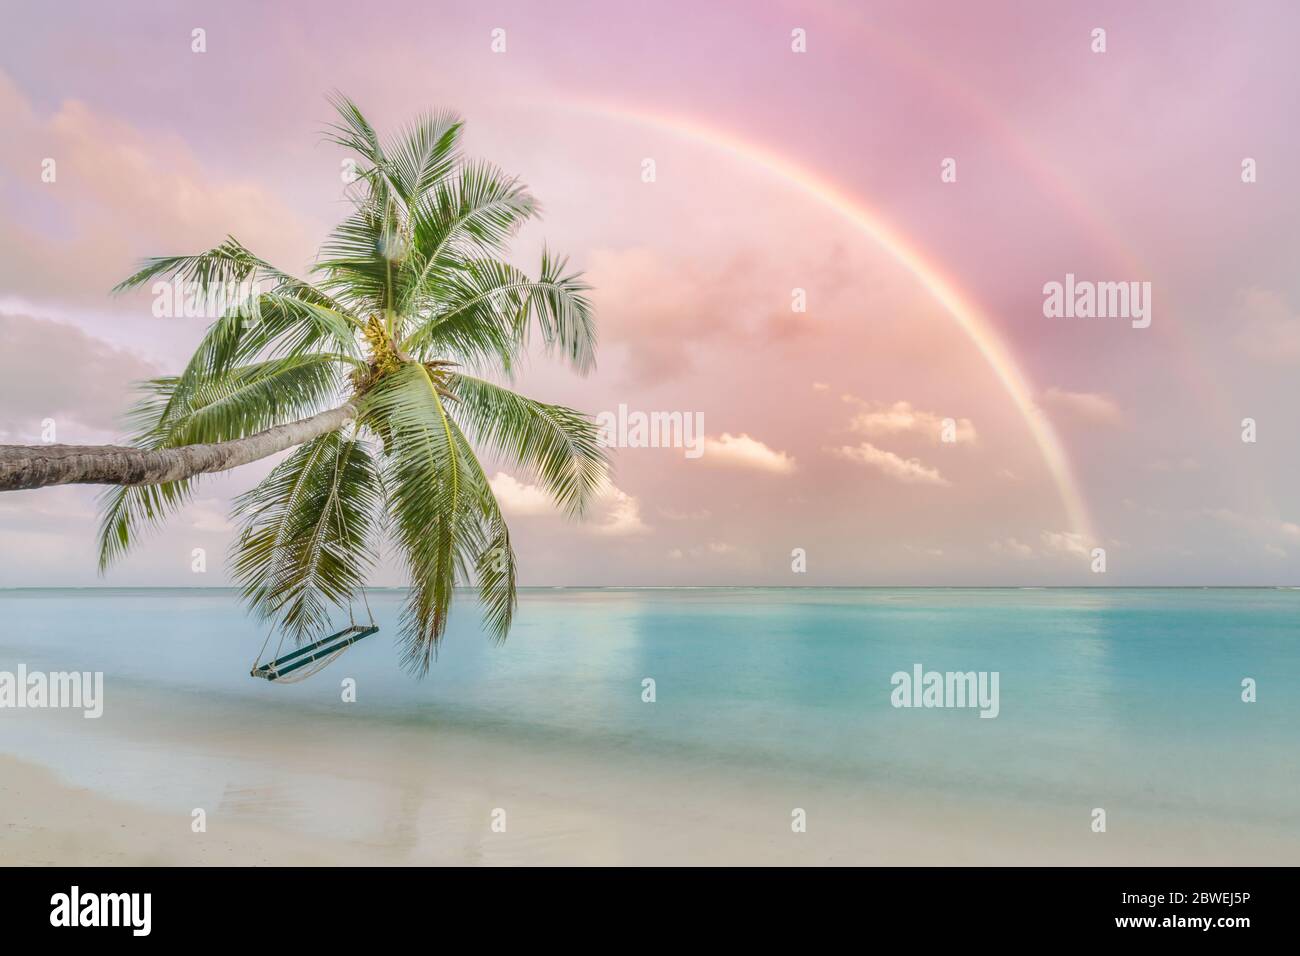 Perfect tropical landscape, sunset beach with palm tree and swing hanging under colorful rainbow. Romantic beach landscape Stock Photo